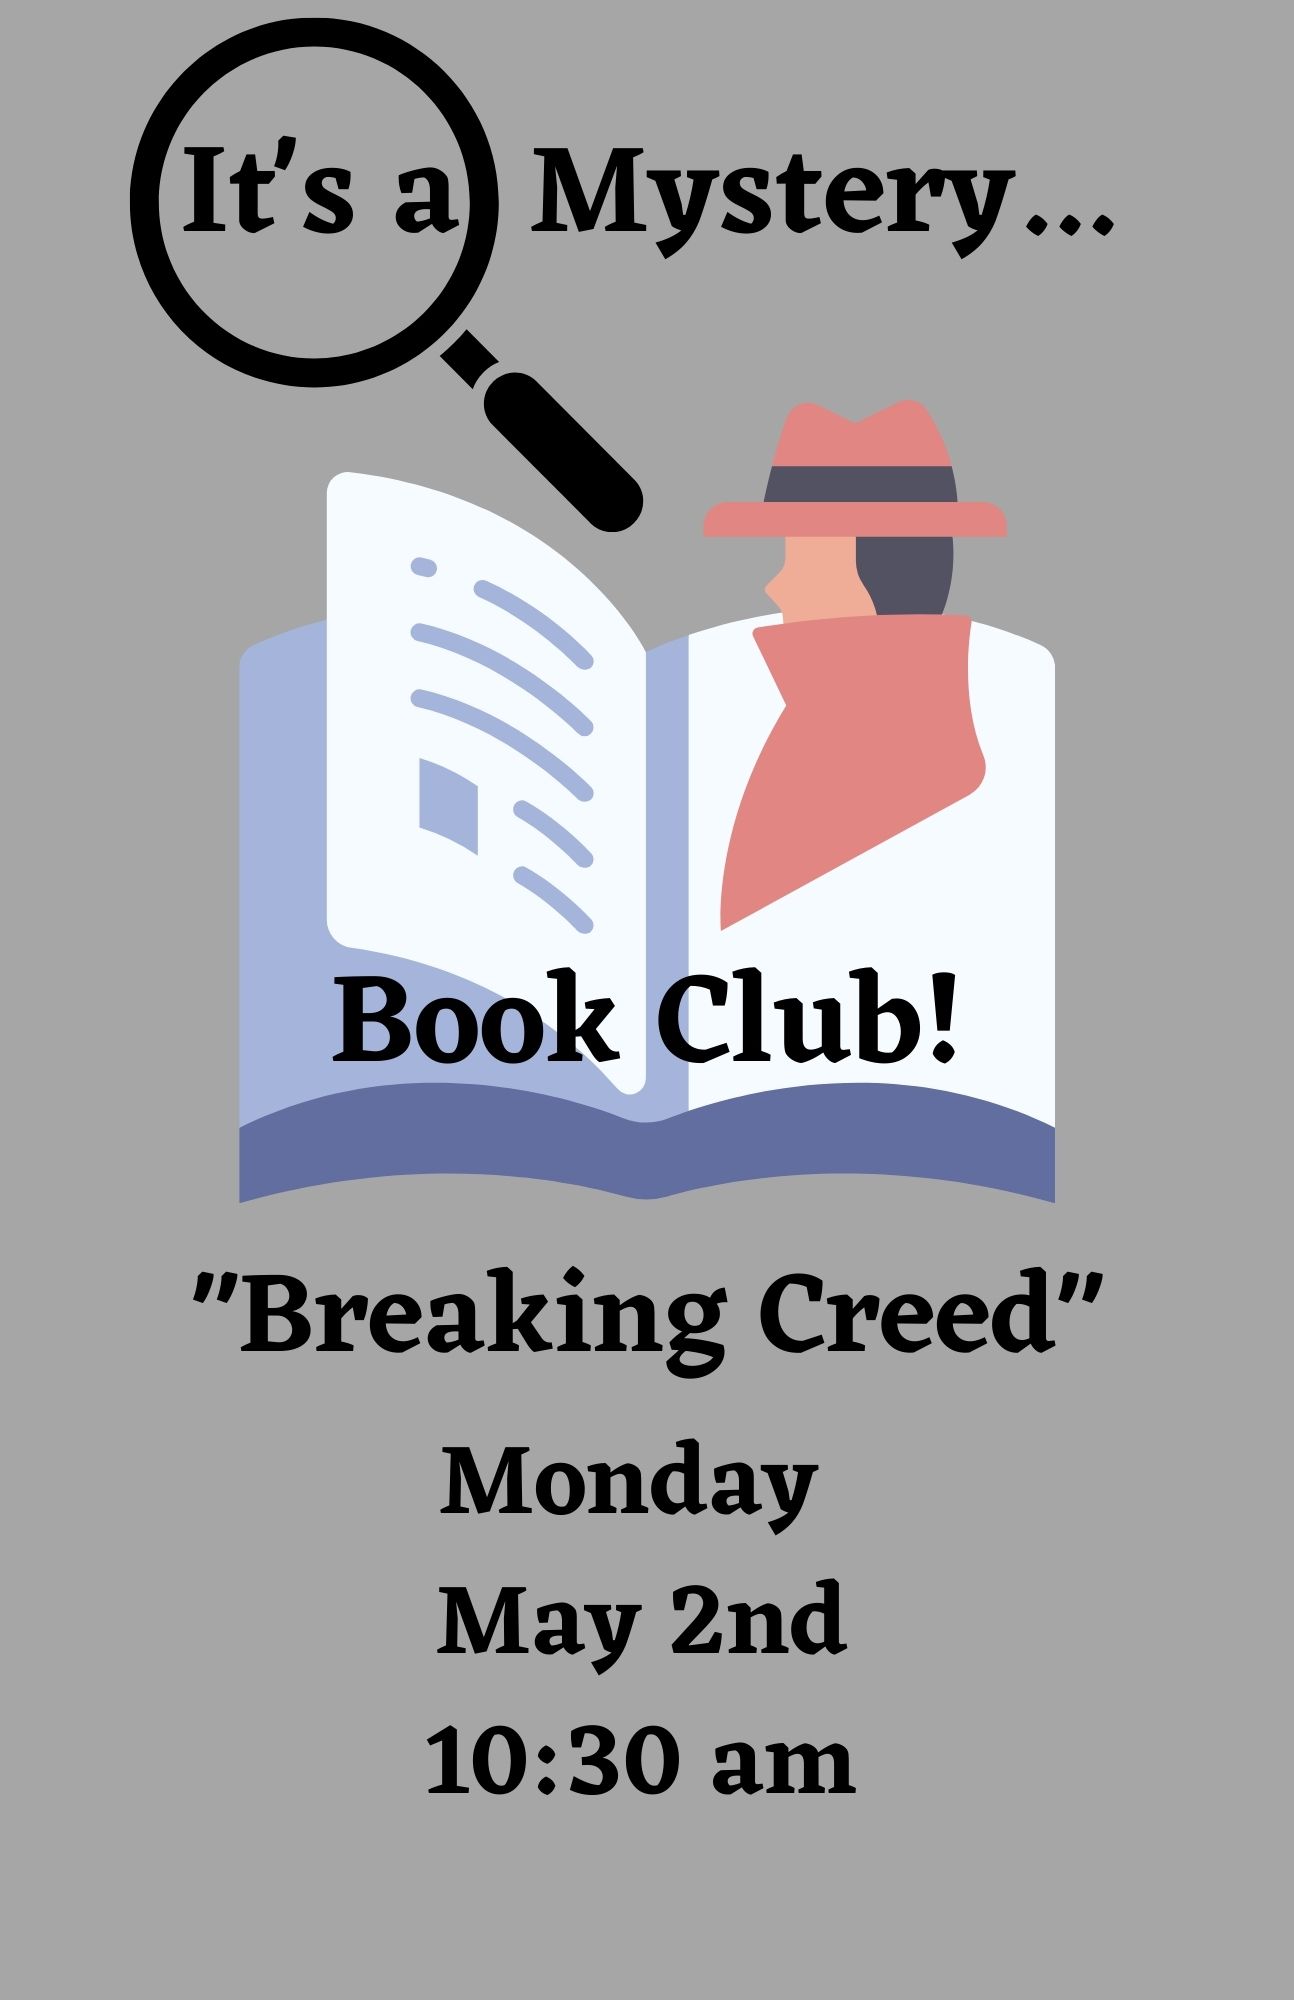 It's a mystery book club reading Breaking Creed by Alex Kava on May 2nd at 10:30 am. Images of a detective with magnifying glass and book.